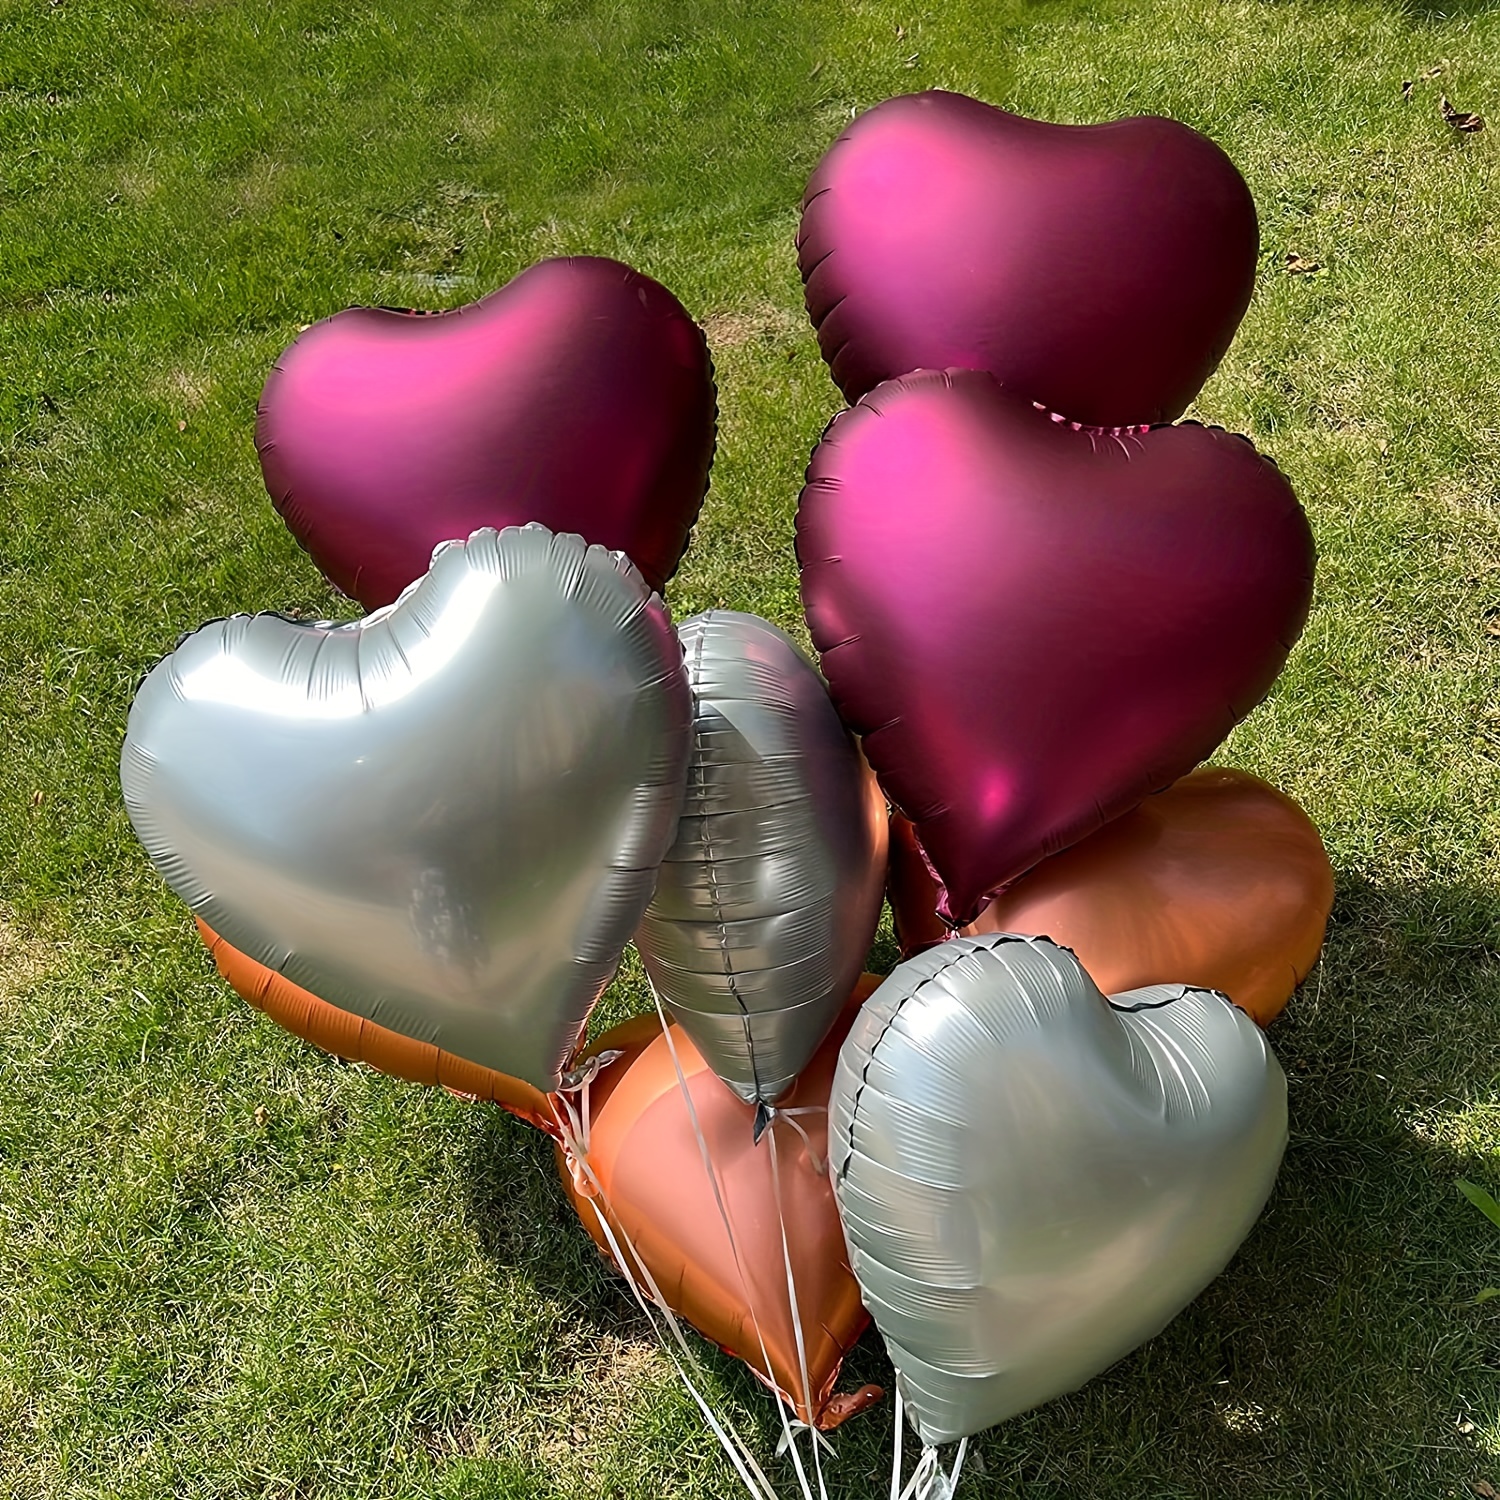 Red Heart shaped Balloons With Pomegranate Design Expressing - Temu